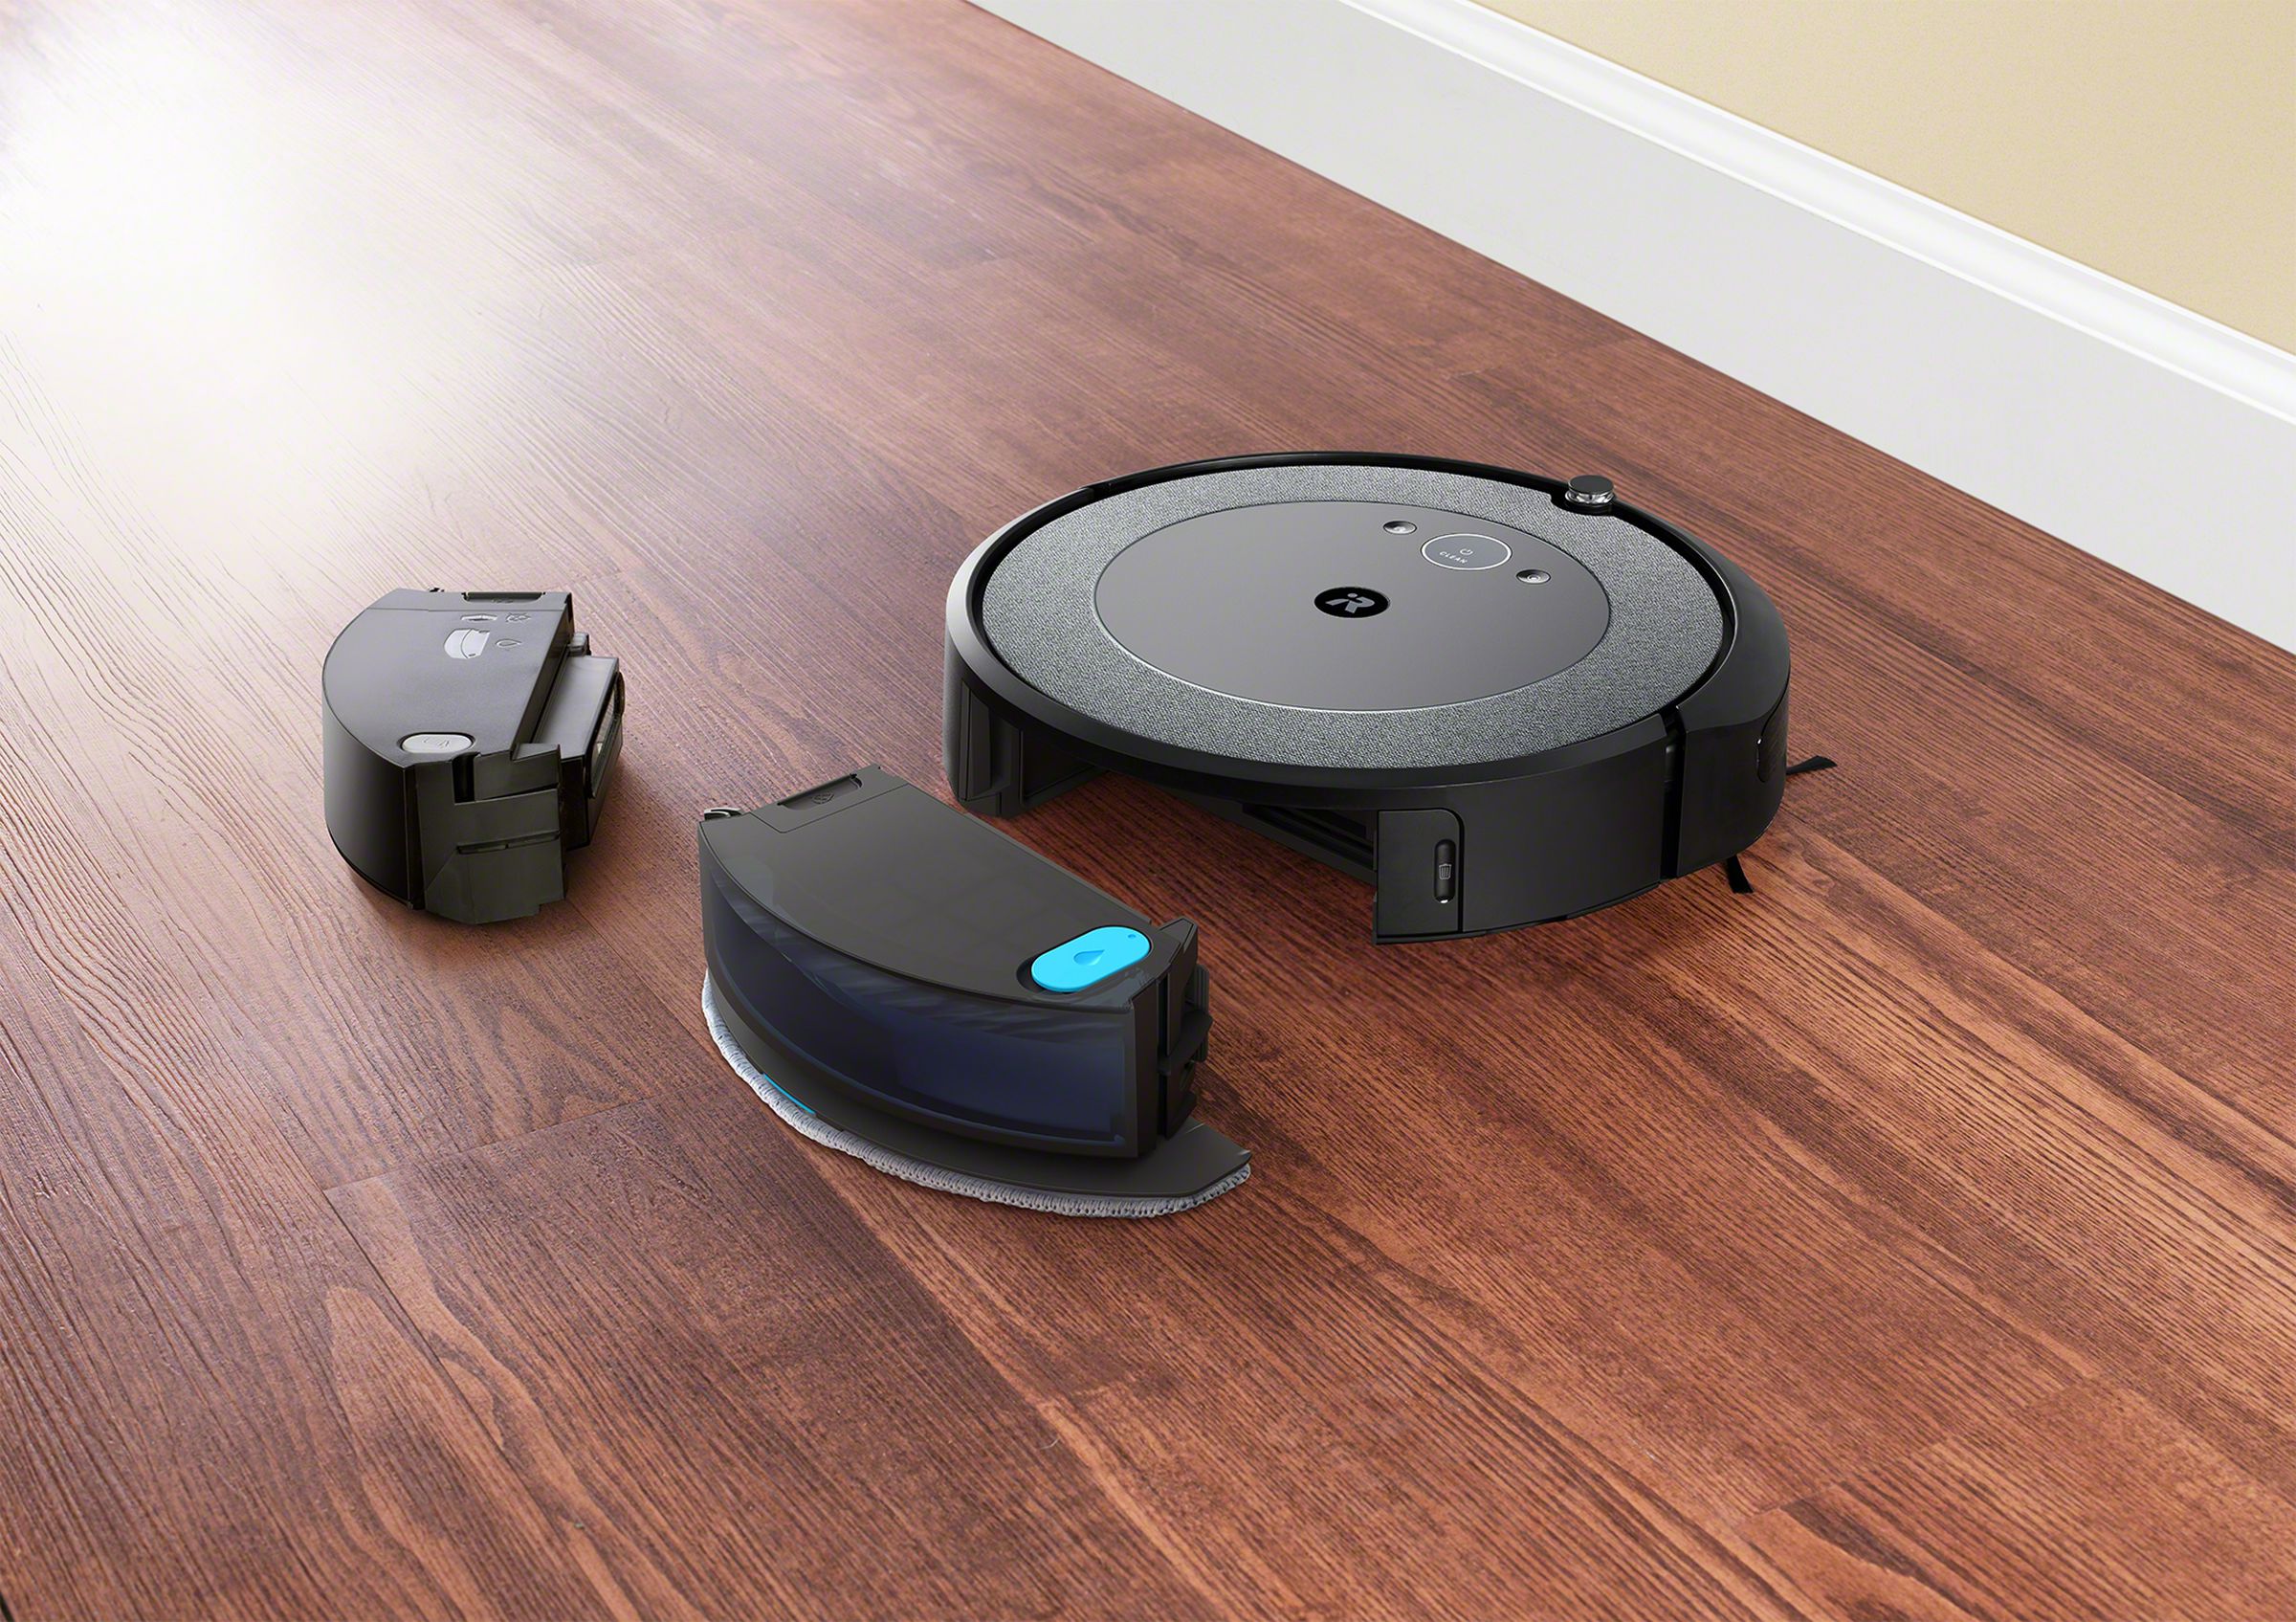 The i5 and j5 models use swappable bins for mopping.